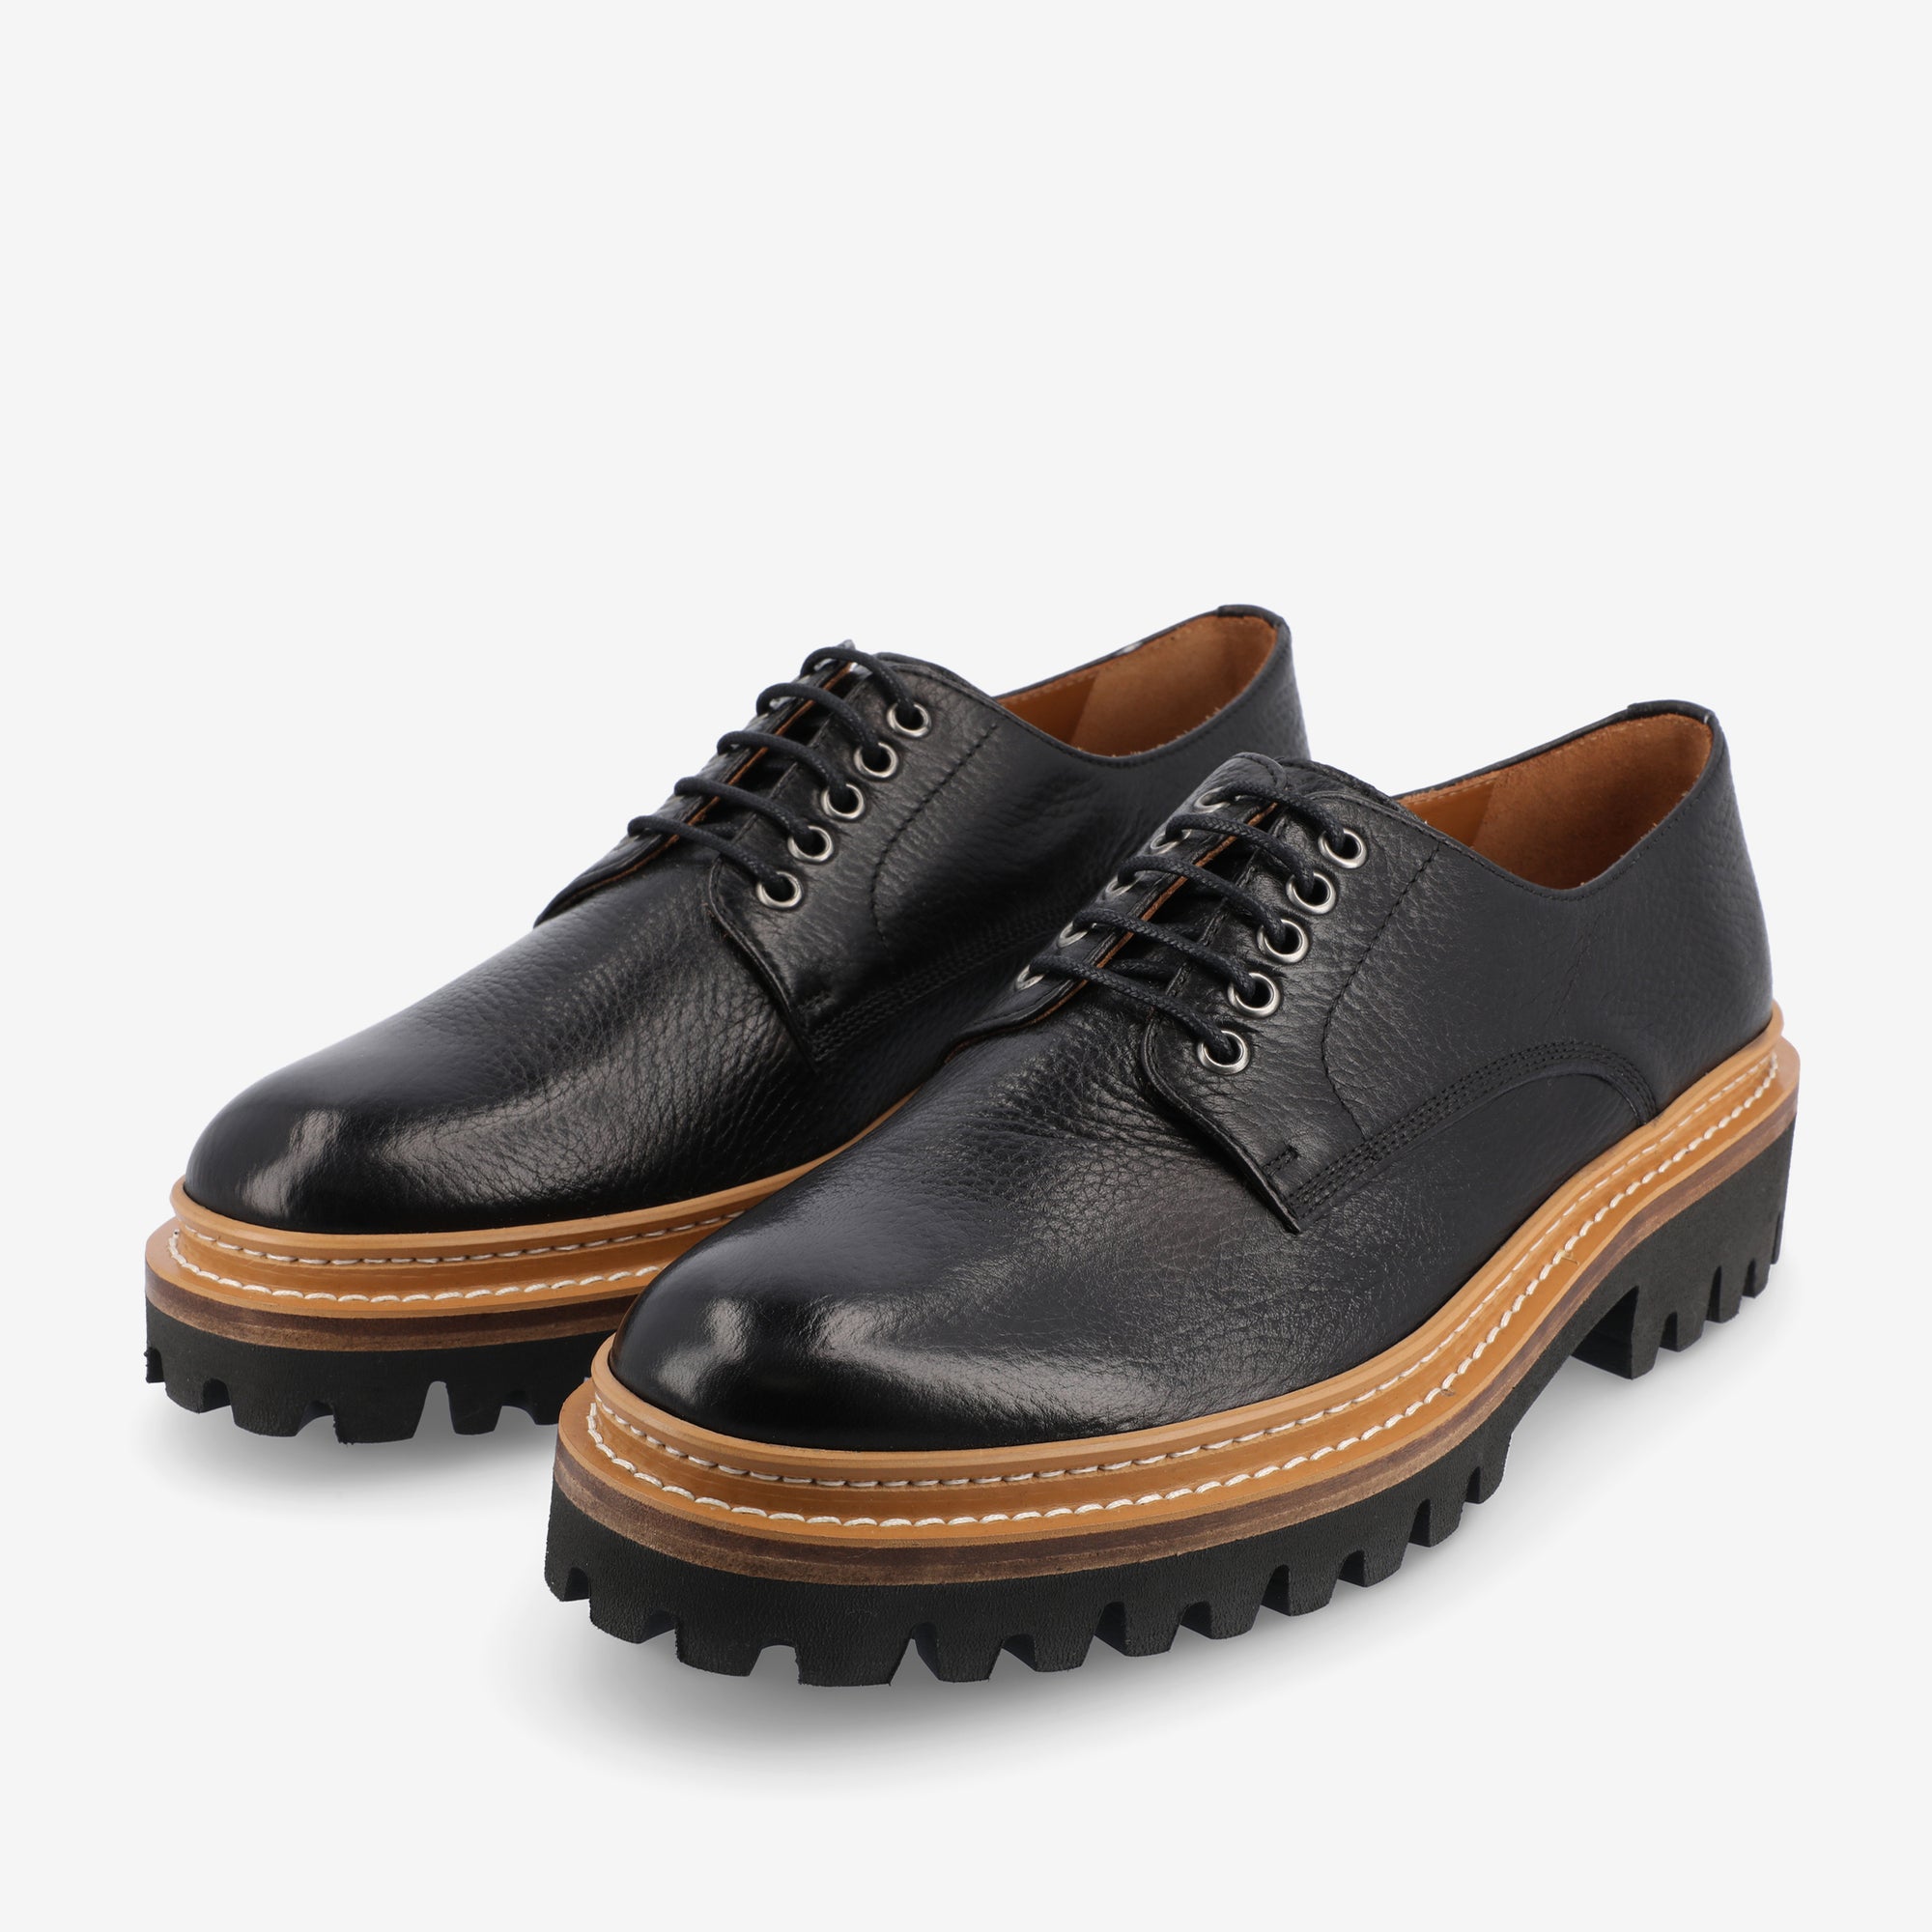 The Country Derby in Black